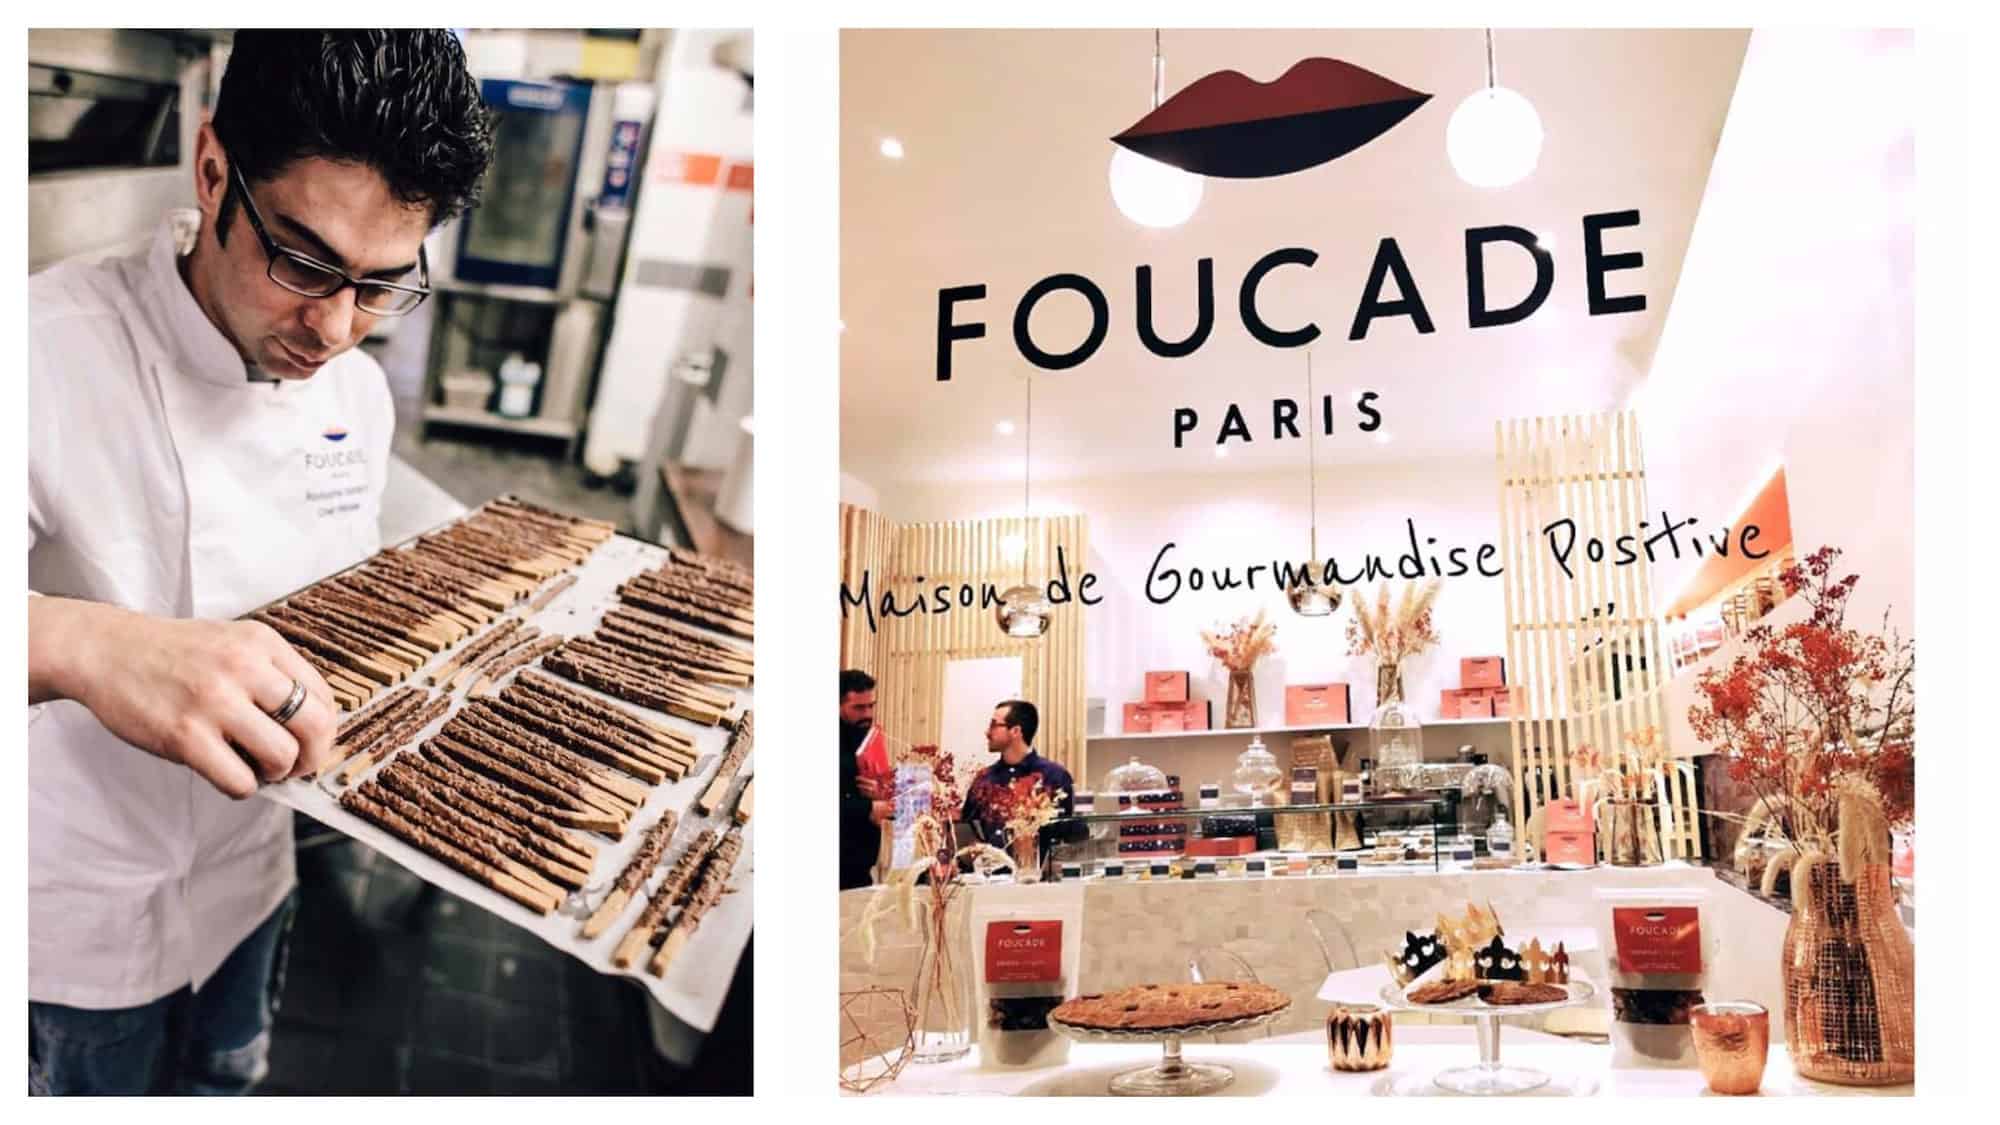 The baker at Foucade, gluten-free bakery in Paris (left) and its window with cakes displayed (right).